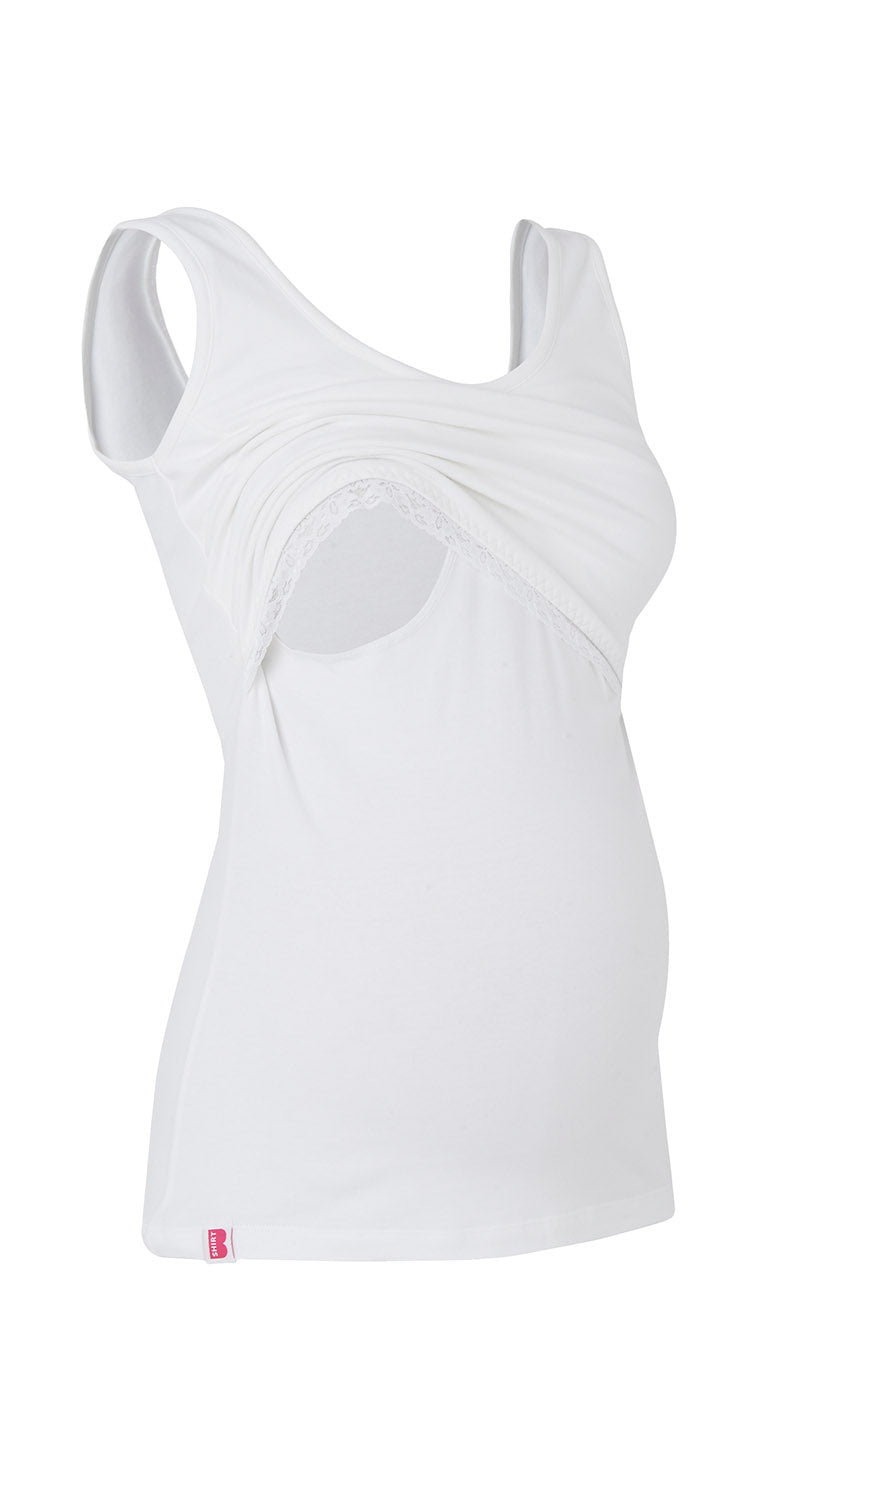 Bshirt Nursing vest (with lace) in White